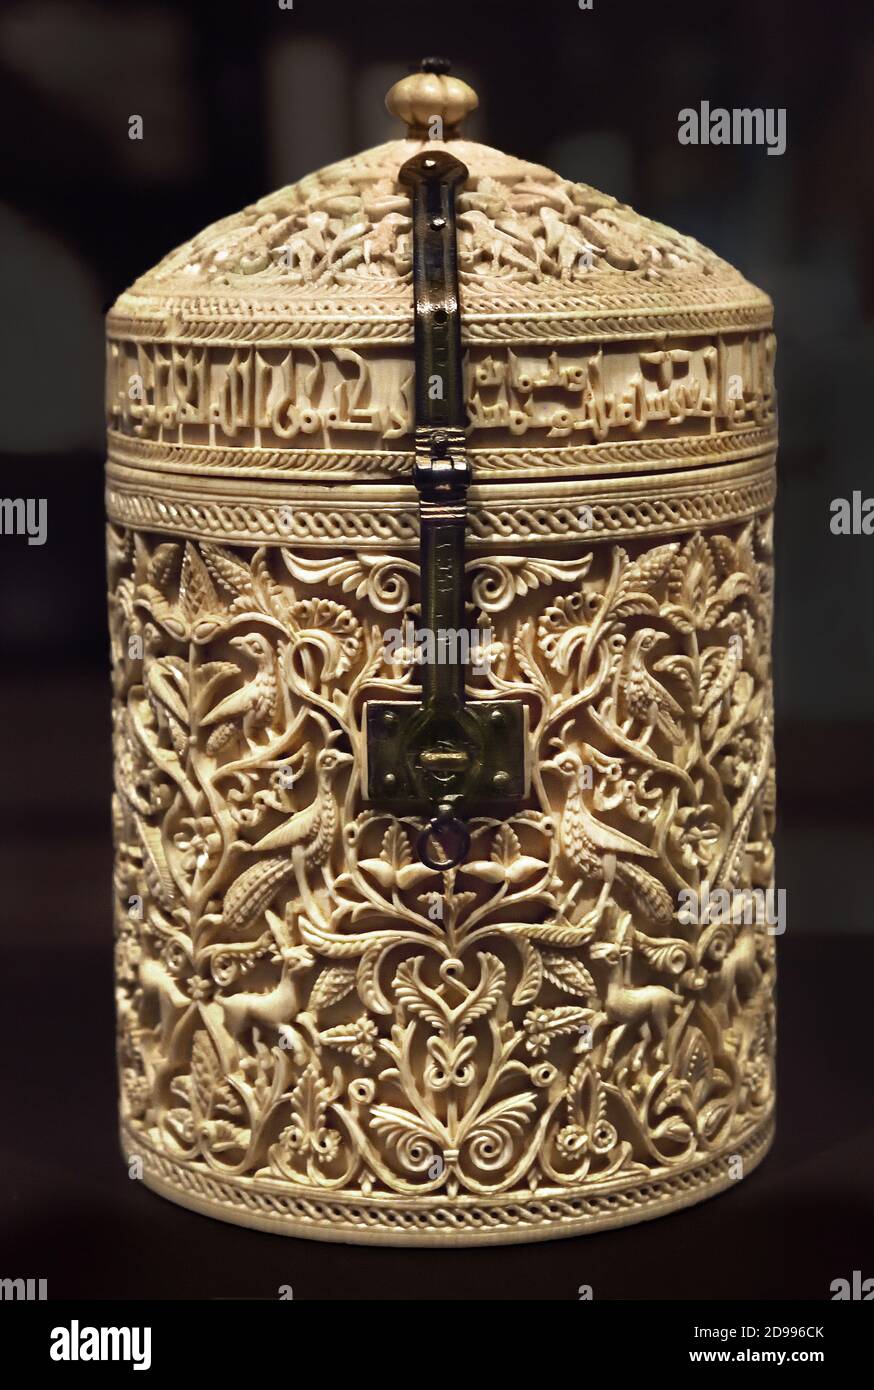 Zamora, pyxis ,Córdoba 353 ,after Hijra / 964 AD , National Archaeological Museum of Spain in Madrid, Spain. ,Ivory box,shape of a cylindrical tusk , dome-shaped lid, that opens and closes with a hinge and a silver clasp, with niello detailing, The delicate carving creates chiaroscuro ,effects with the decorative motifs, arabesques and palmettes, gazelles, peacocks and other birds that recreate a palace garden ) Stock Photo